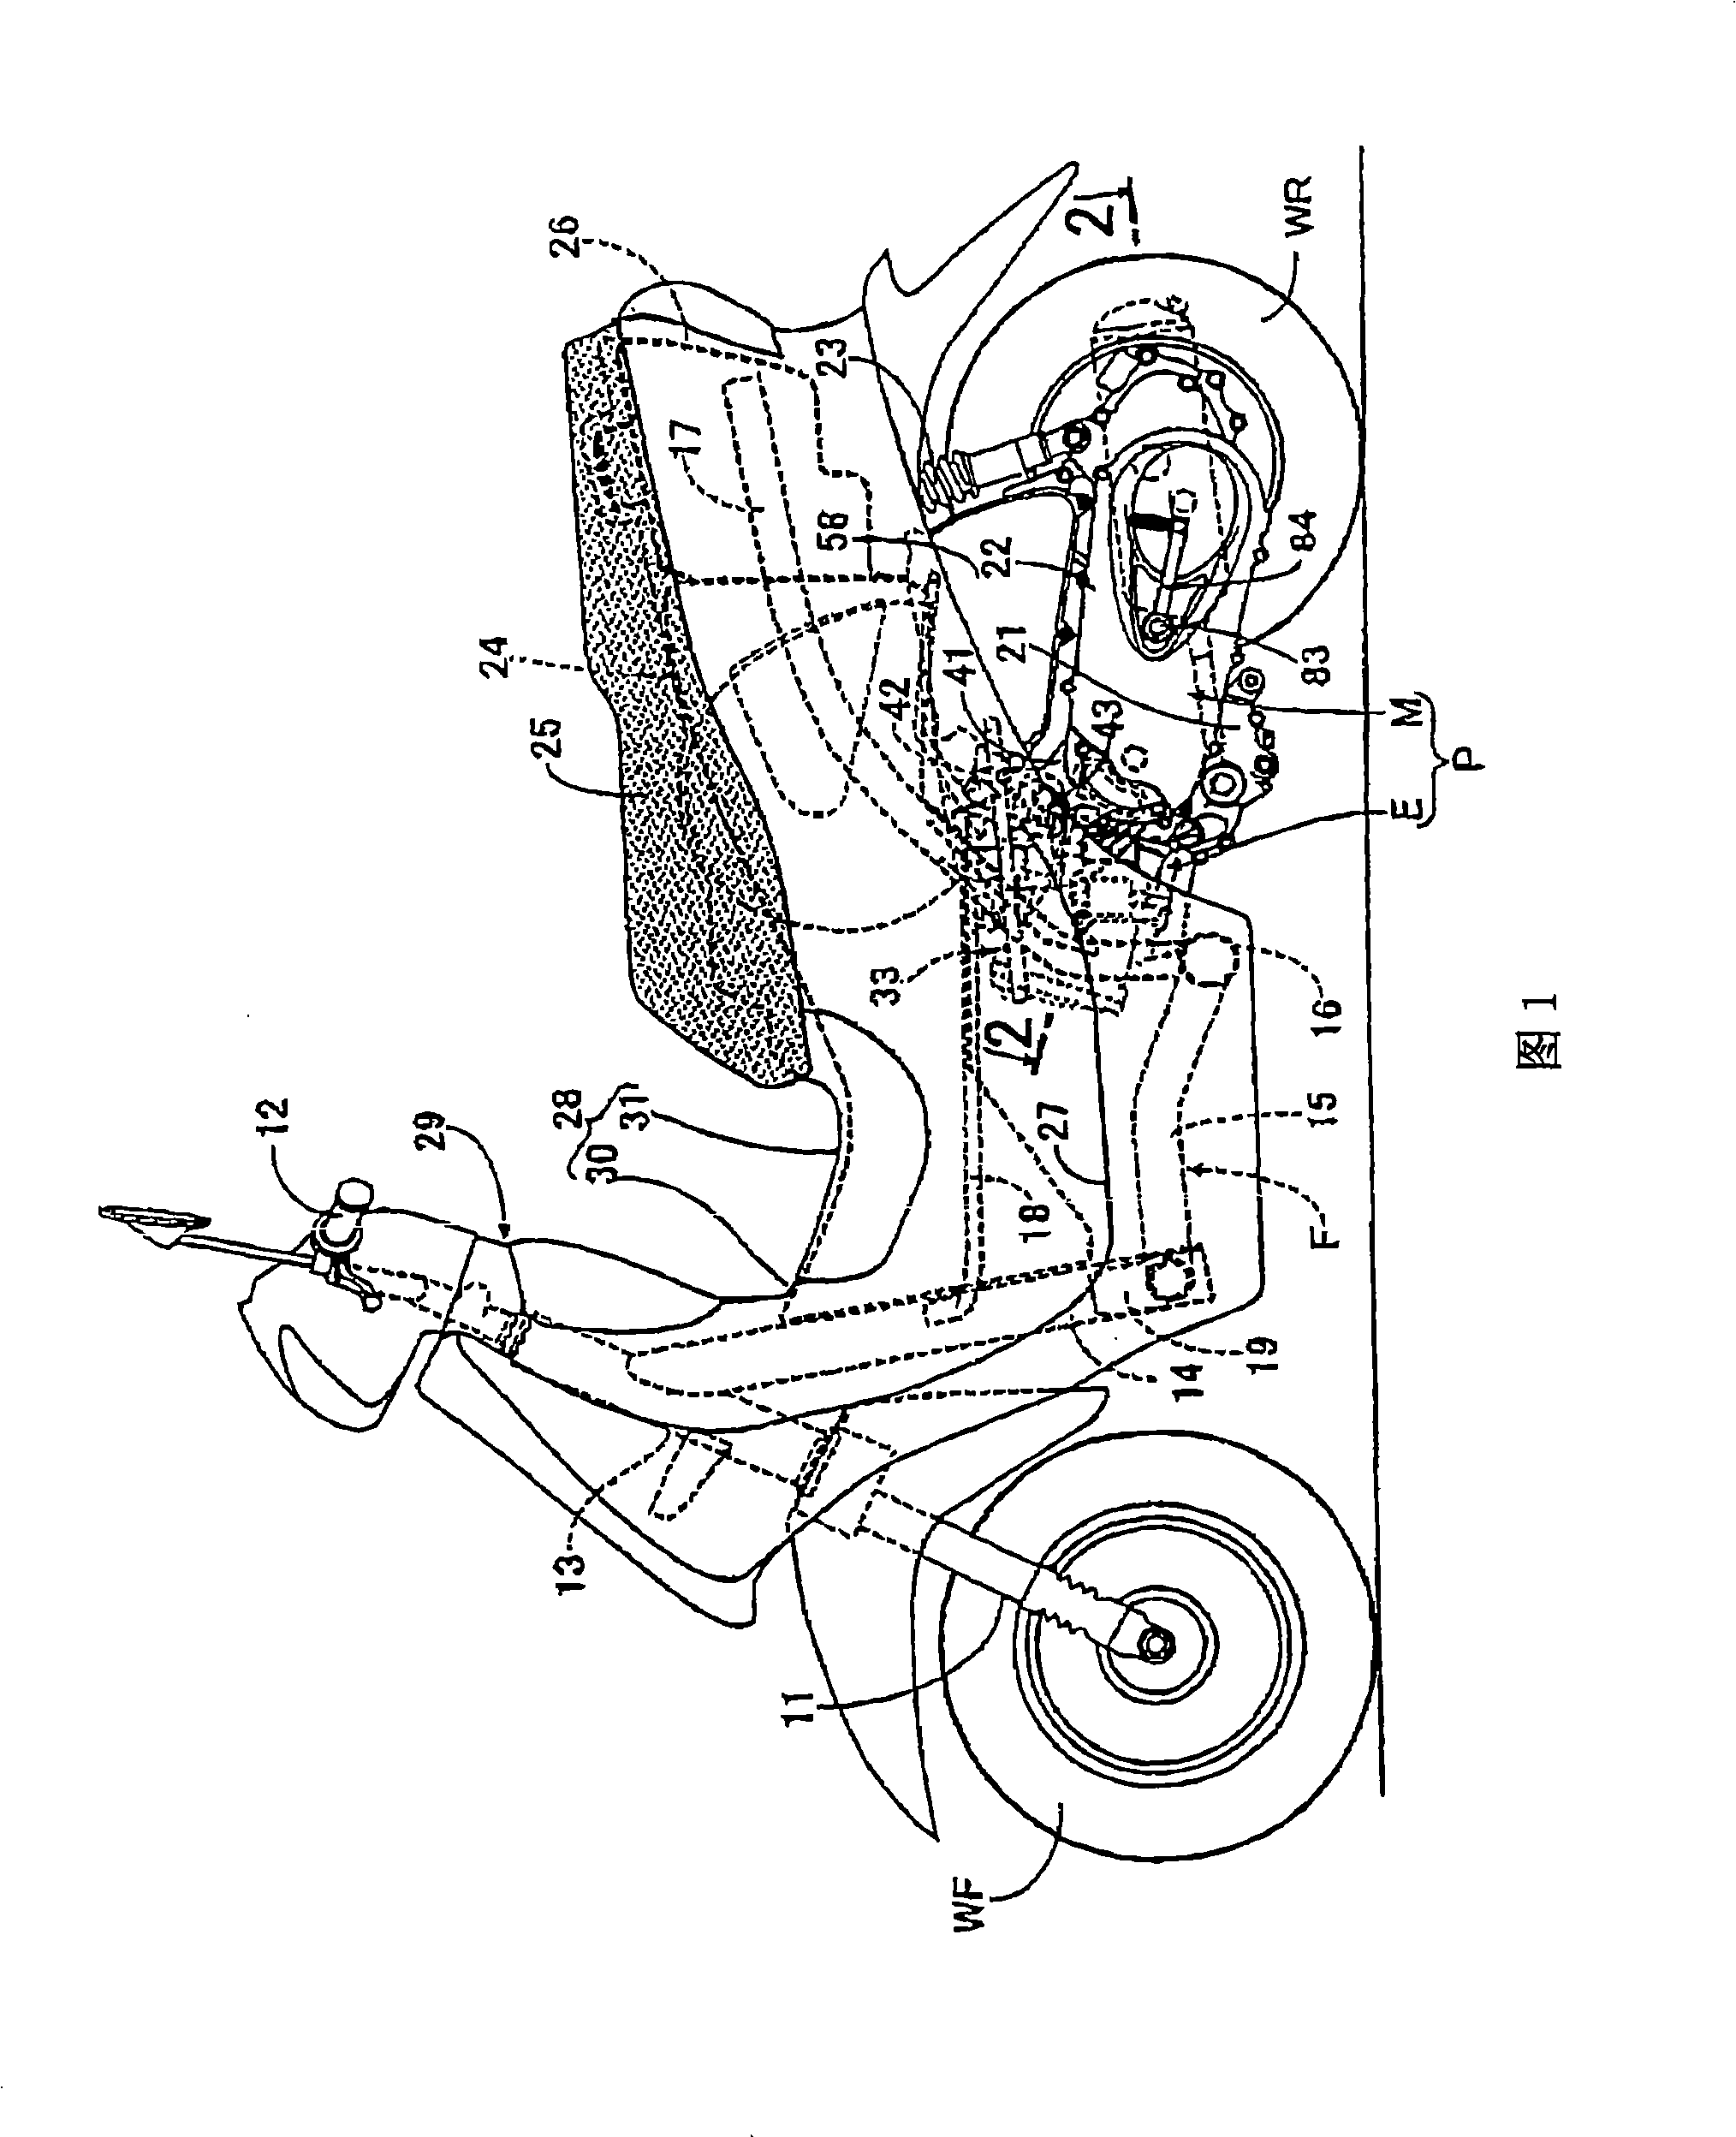 Cooling system of engine for small-sized vehicle